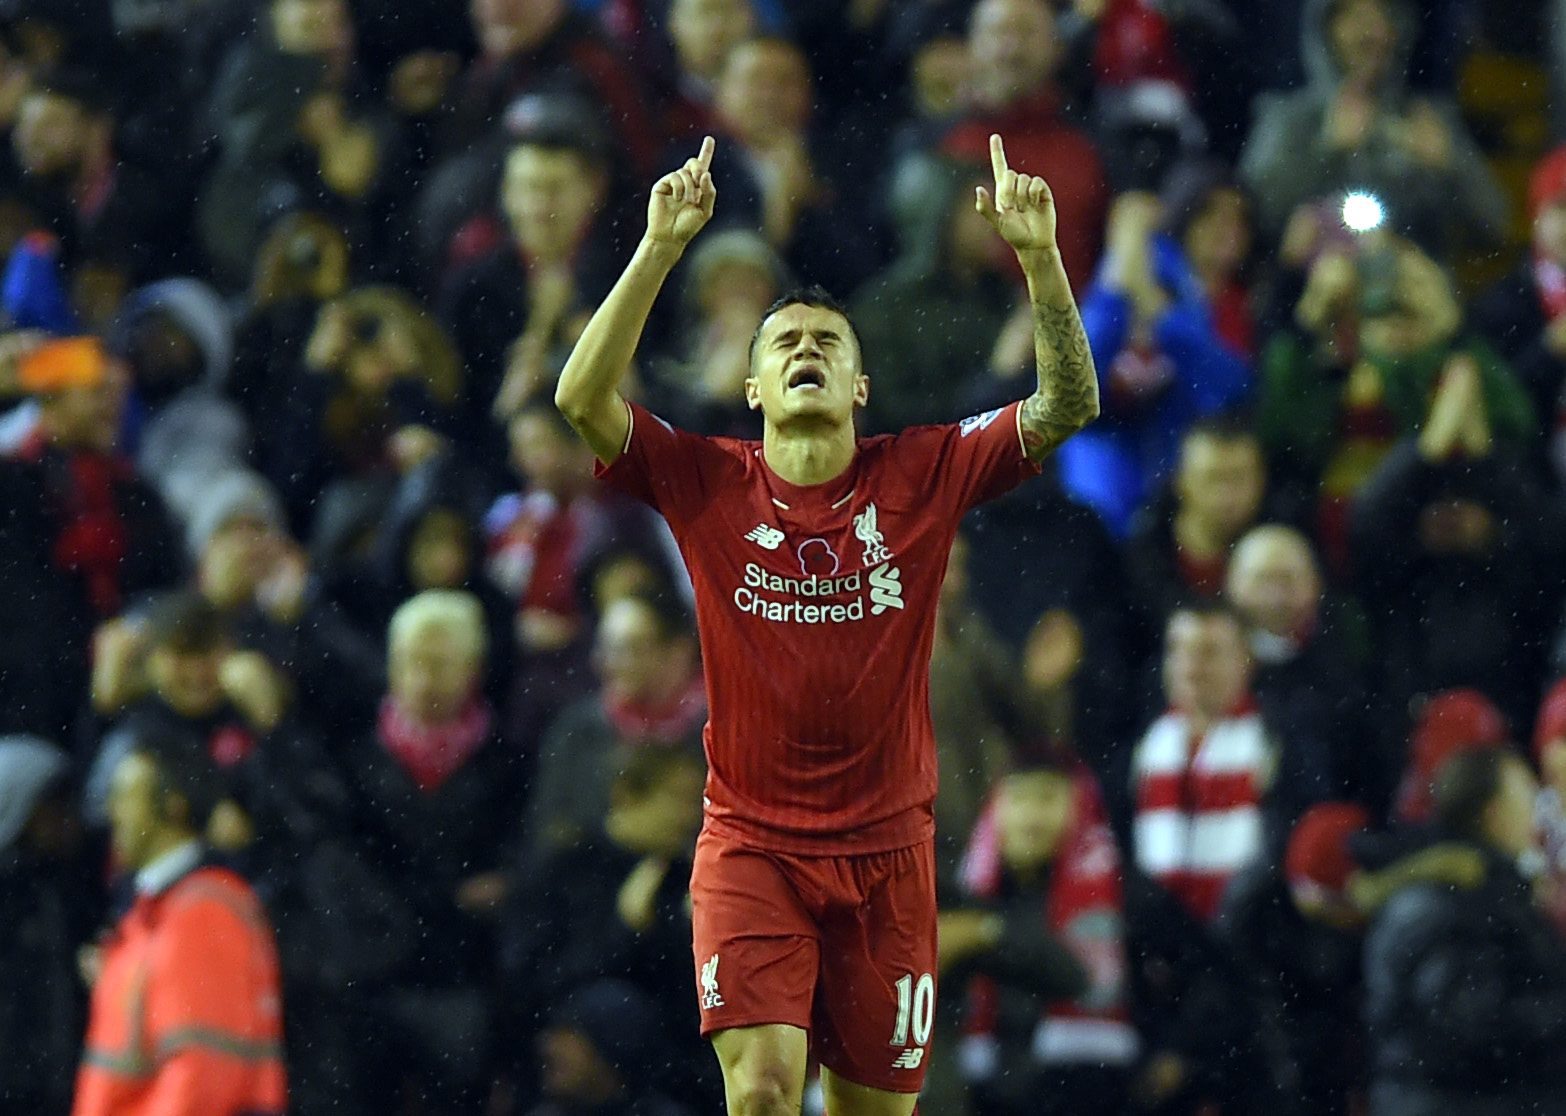 epa05017038 Liverpool's Philippe Coutinho celebrates scoring the second goal making the score 1-1 during the English Premier League soccer match between Liverpool and Crystal Palace, Liverpool, Britain, 08 November 2015.  EPA/PETER POWELL EDITORIAL USE ONLY. No use with unauthorized audio, video, data, fixture lists, club/league logos or 'live' services. Online in-match use limited to 75 images, no video emulation. No use in betting, games or single club/league/player publications